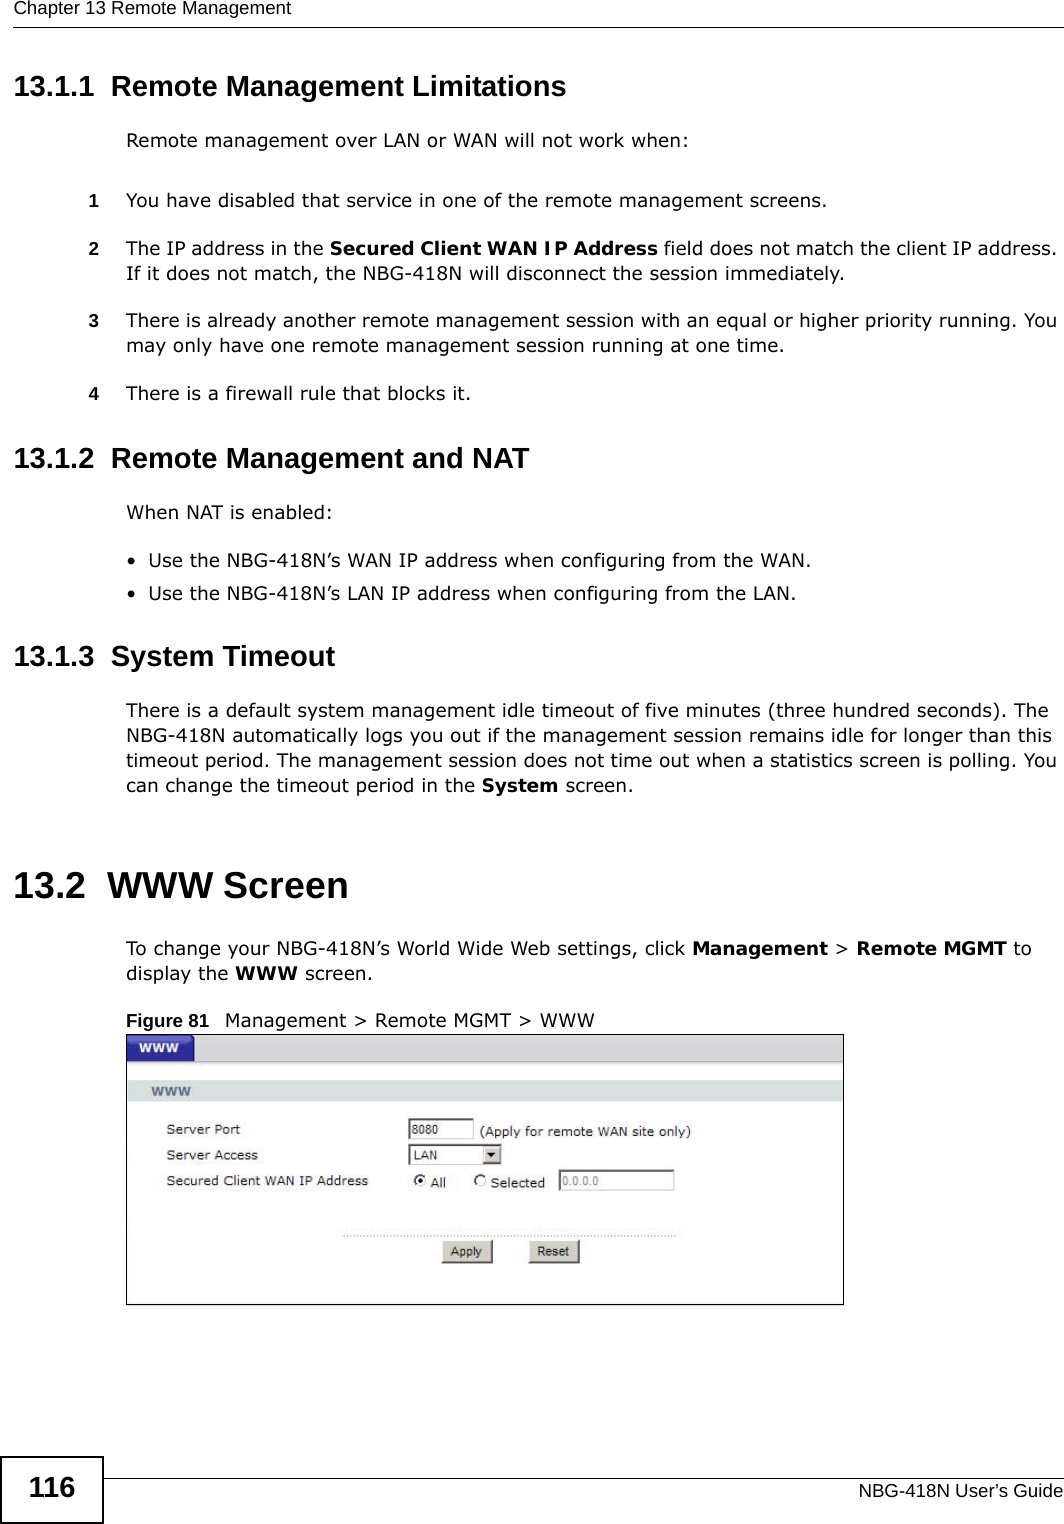 Chapter 13 Remote ManagementNBG-418N User’s Guide11613.1.1  Remote Management LimitationsRemote management over LAN or WAN will not work when:1You have disabled that service in one of the remote management screens.2The IP address in the Secured Client WAN IP Address field does not match the client IP address. If it does not match, the NBG-418N will disconnect the session immediately.3There is already another remote management session with an equal or higher priority running. You may only have one remote management session running at one time.4There is a firewall rule that blocks it.13.1.2  Remote Management and NATWhen NAT is enabled:• Use the NBG-418N’s WAN IP address when configuring from the WAN. • Use the NBG-418N’s LAN IP address when configuring from the LAN.13.1.3  System TimeoutThere is a default system management idle timeout of five minutes (three hundred seconds). The NBG-418N automatically logs you out if the management session remains idle for longer than this timeout period. The management session does not time out when a statistics screen is polling. You can change the timeout period in the System screen.13.2  WWW Screen    To change your NBG-418N’s World Wide Web settings, click Management &gt; Remote MGMT to display the WWW screen.Figure 81   Management &gt; Remote MGMT &gt; WWW 